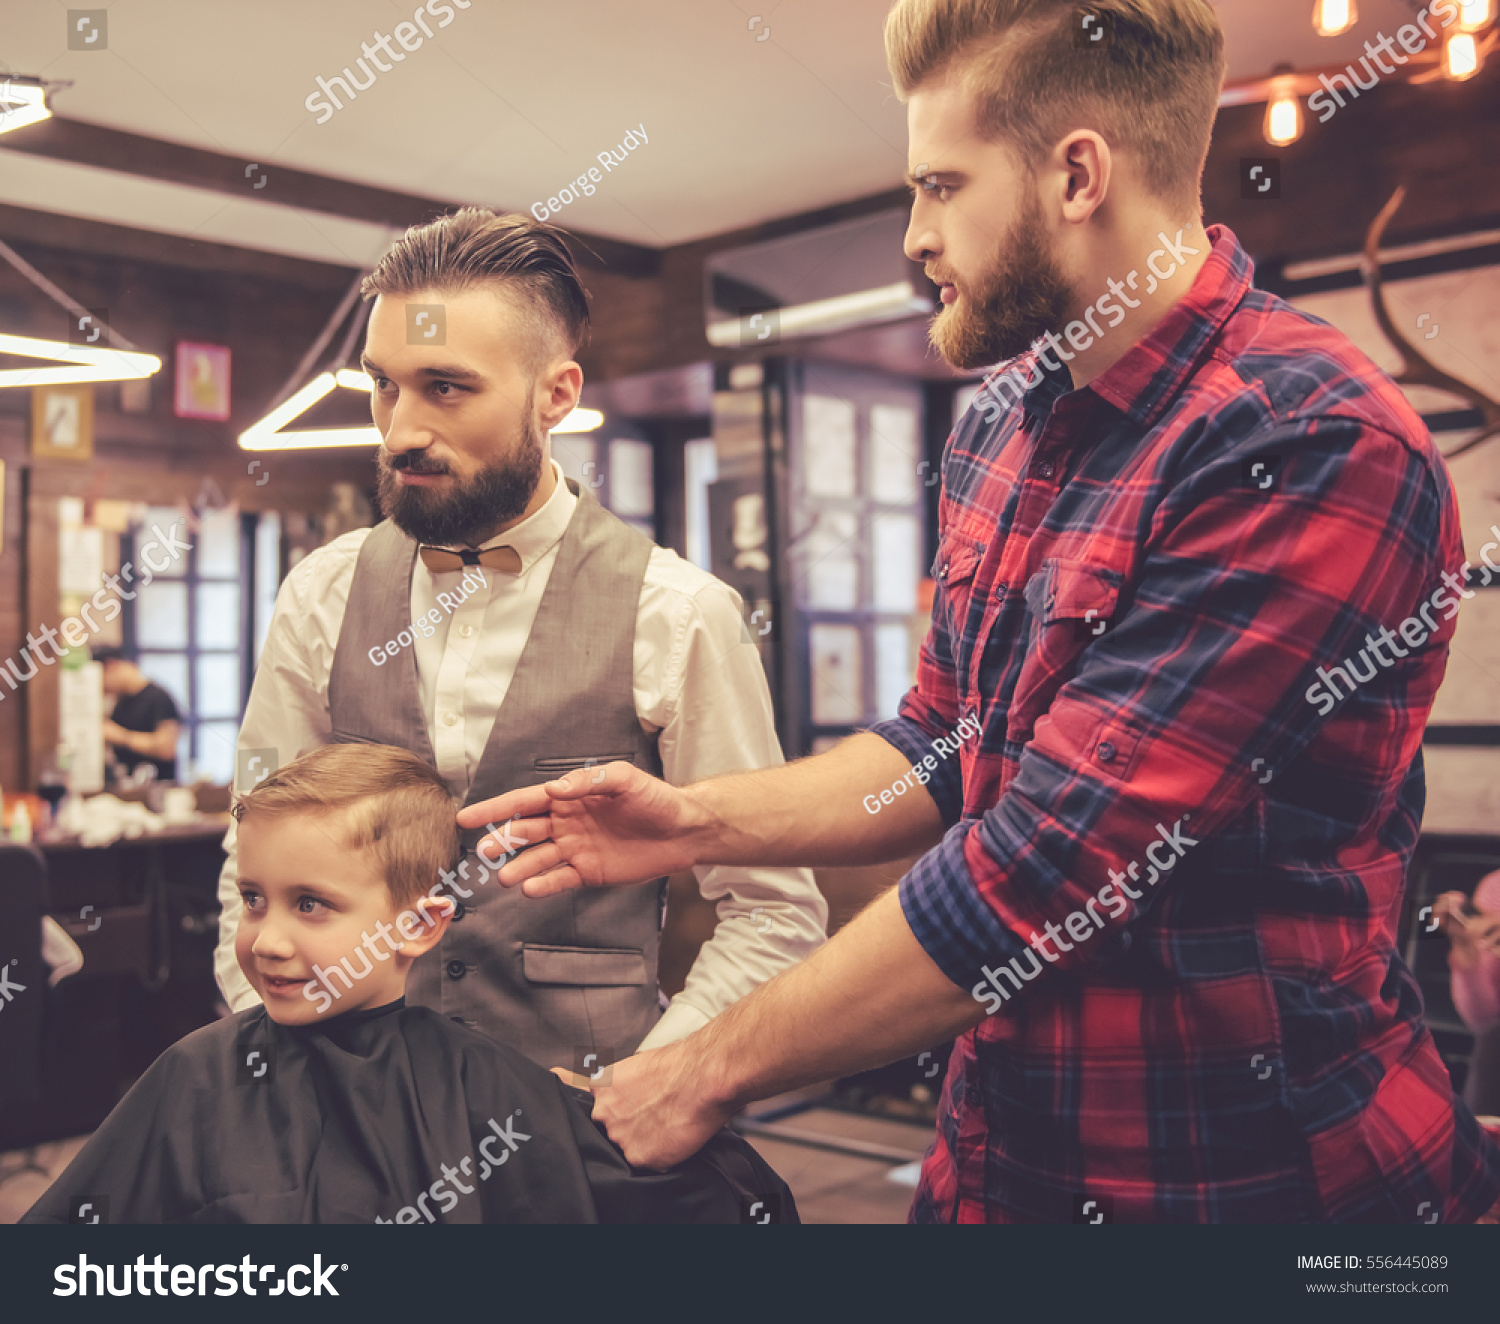 Father and son hair cut Images, Stock Photos & Vectors | Shutterstock